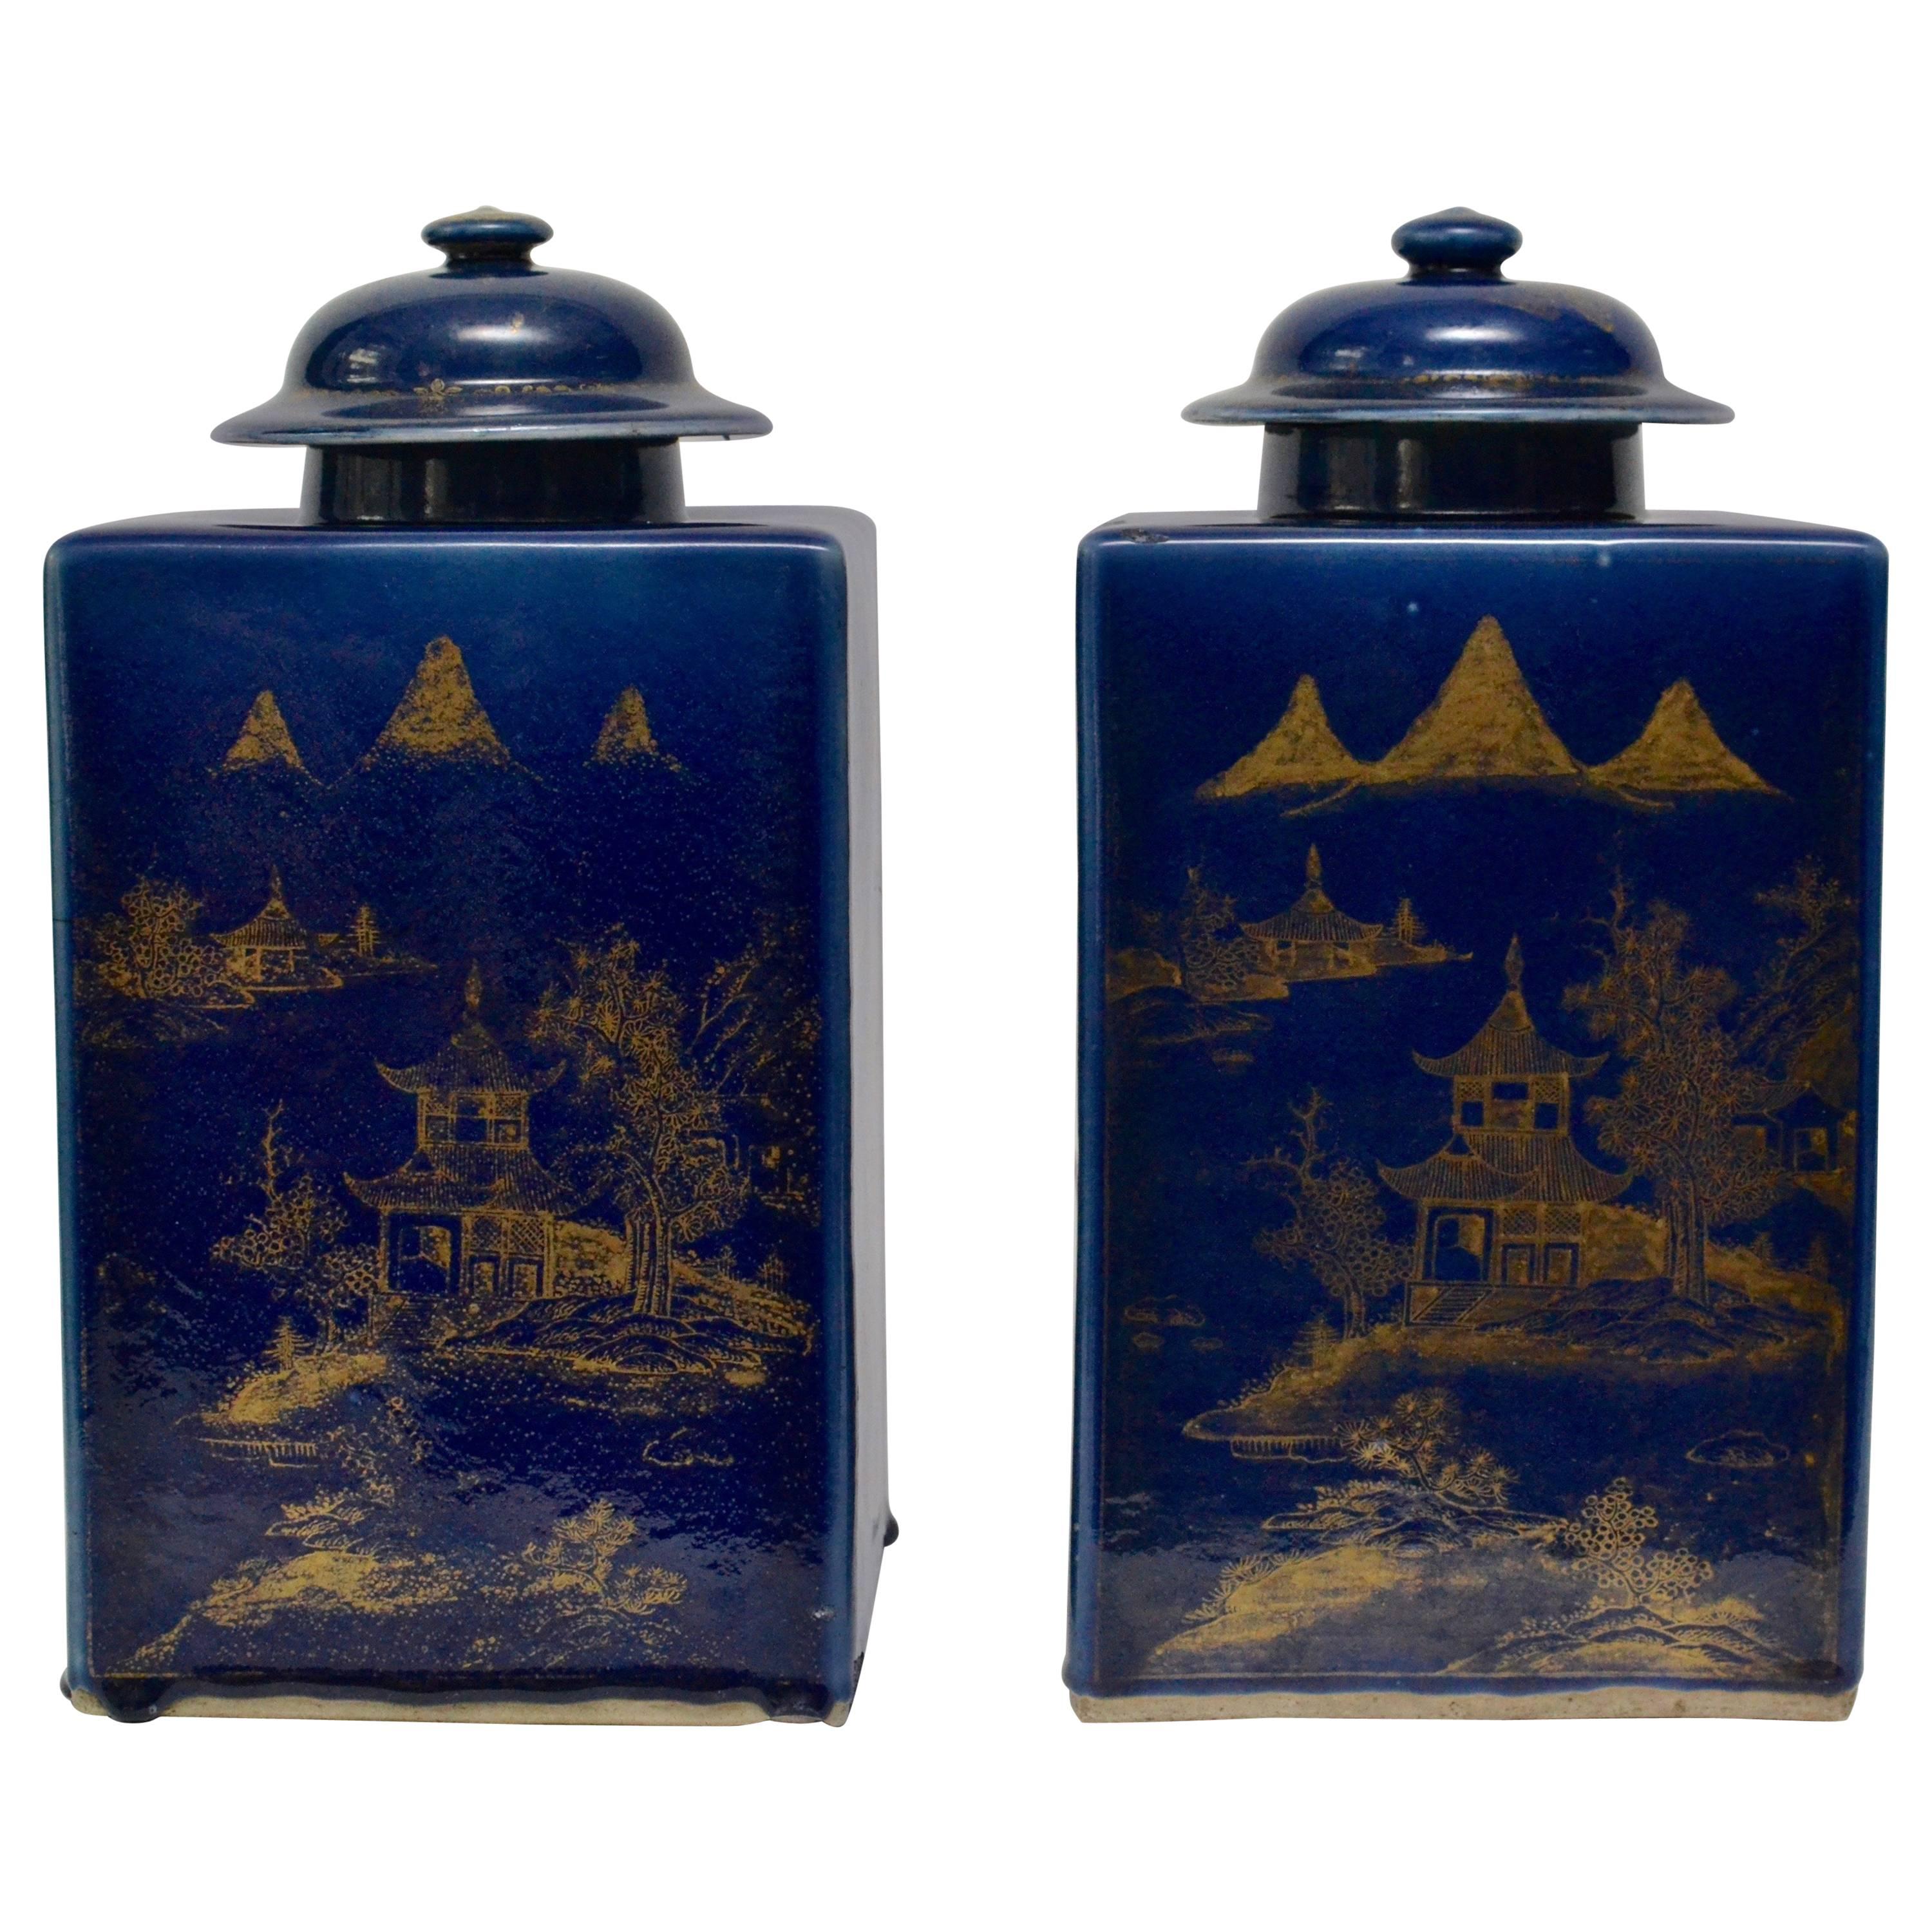 Pair of Powder Blue Chinese Tea Caddy Urns with Lids, circa 1800